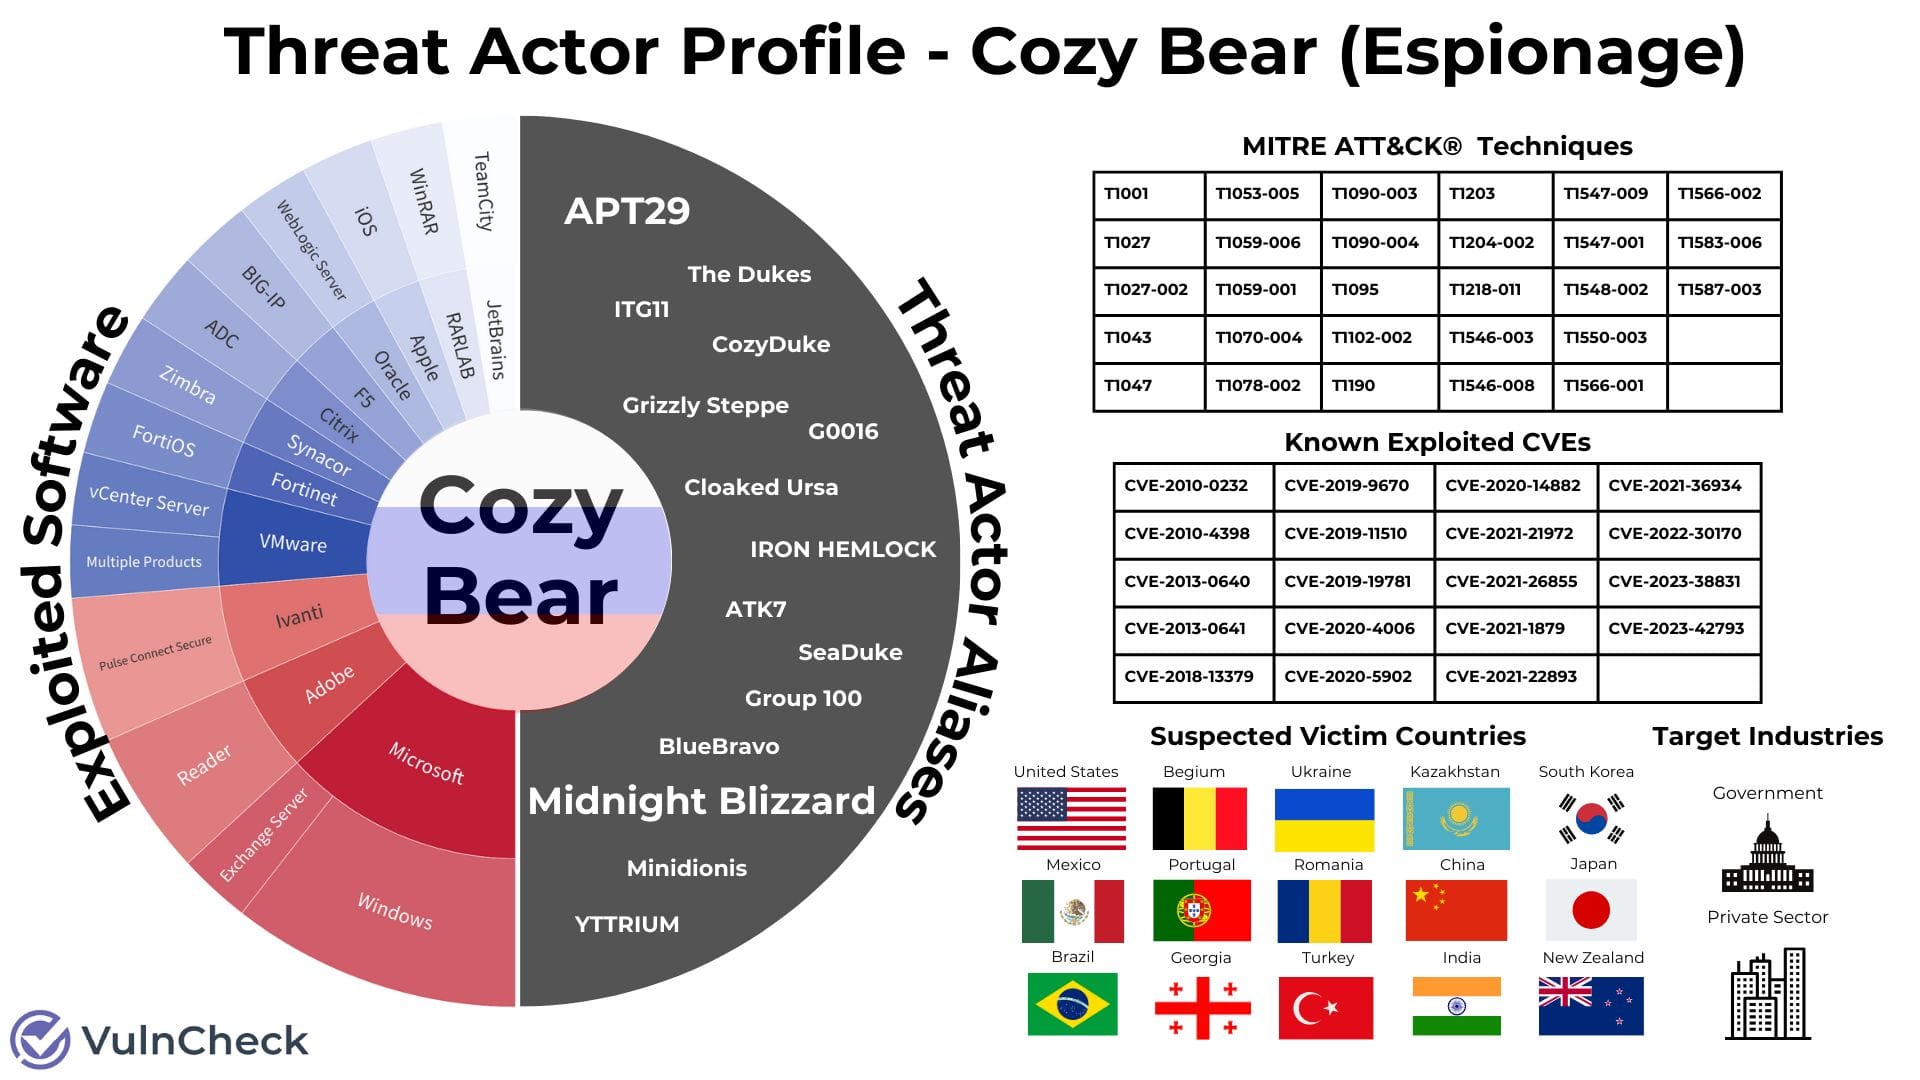 Threat actor profile for Cozy Bear